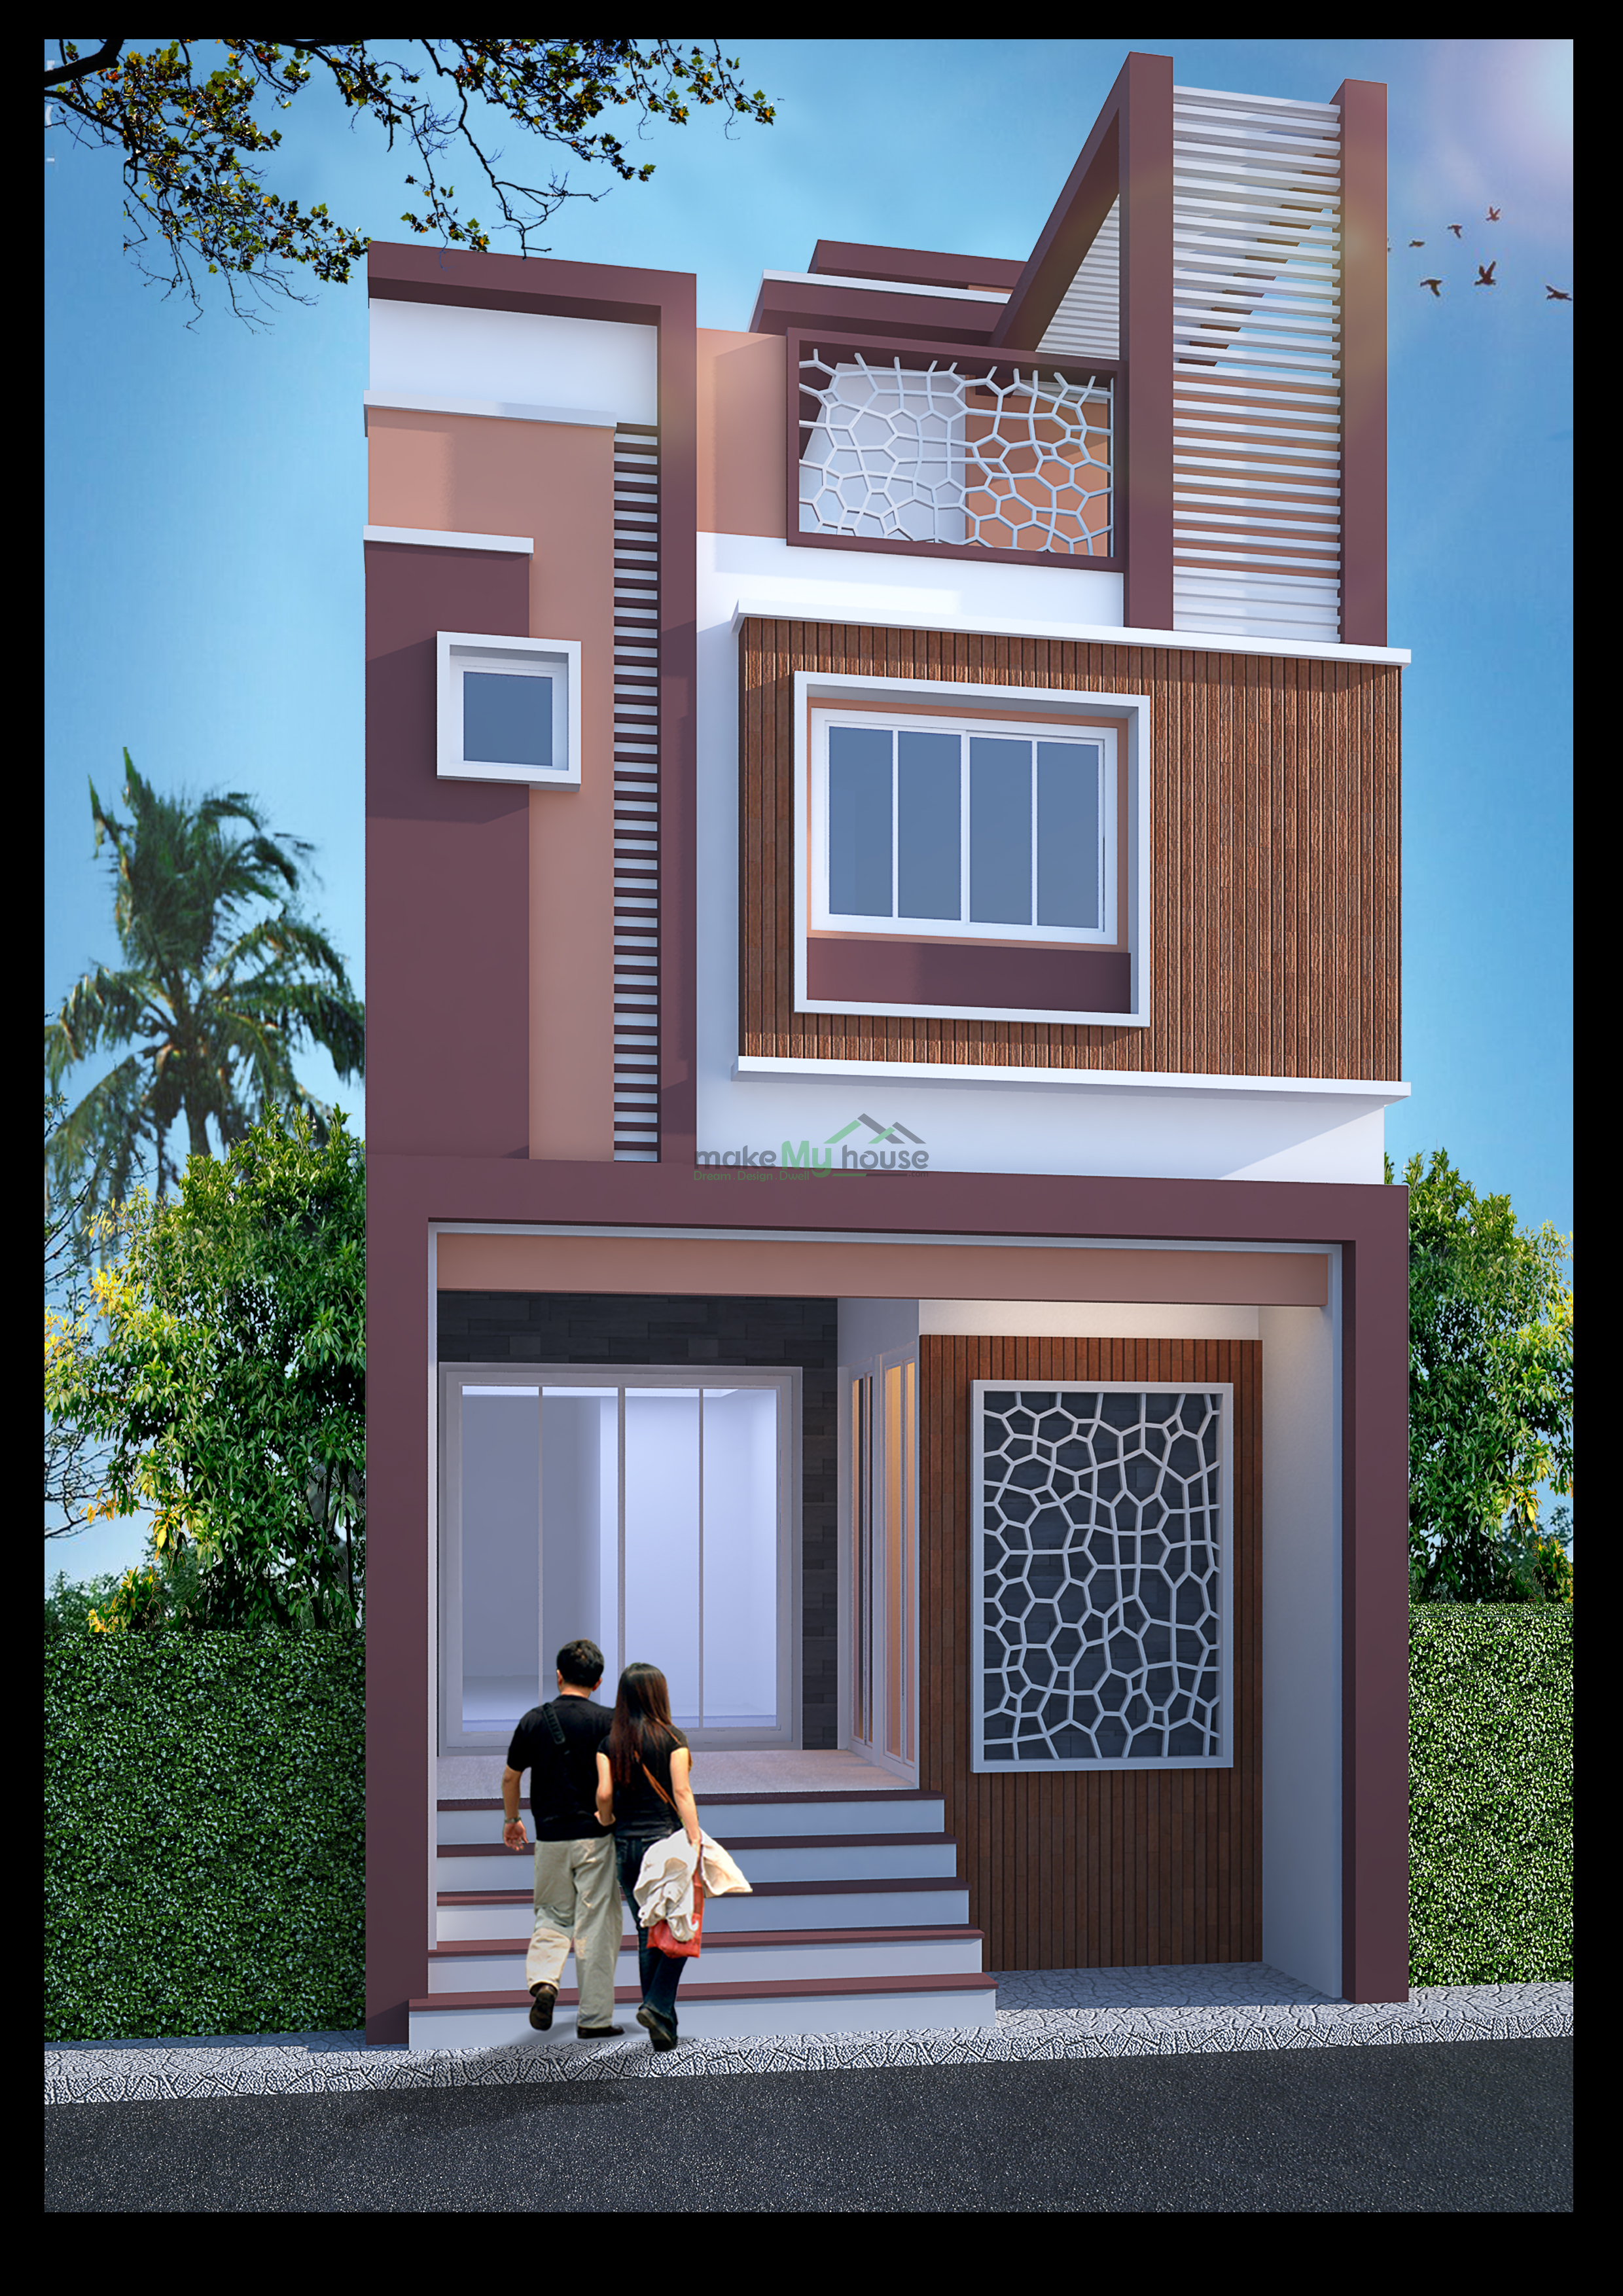 18x50 House With Office Plan 900 Sqft House With Office Design 3 Story Floor Plan